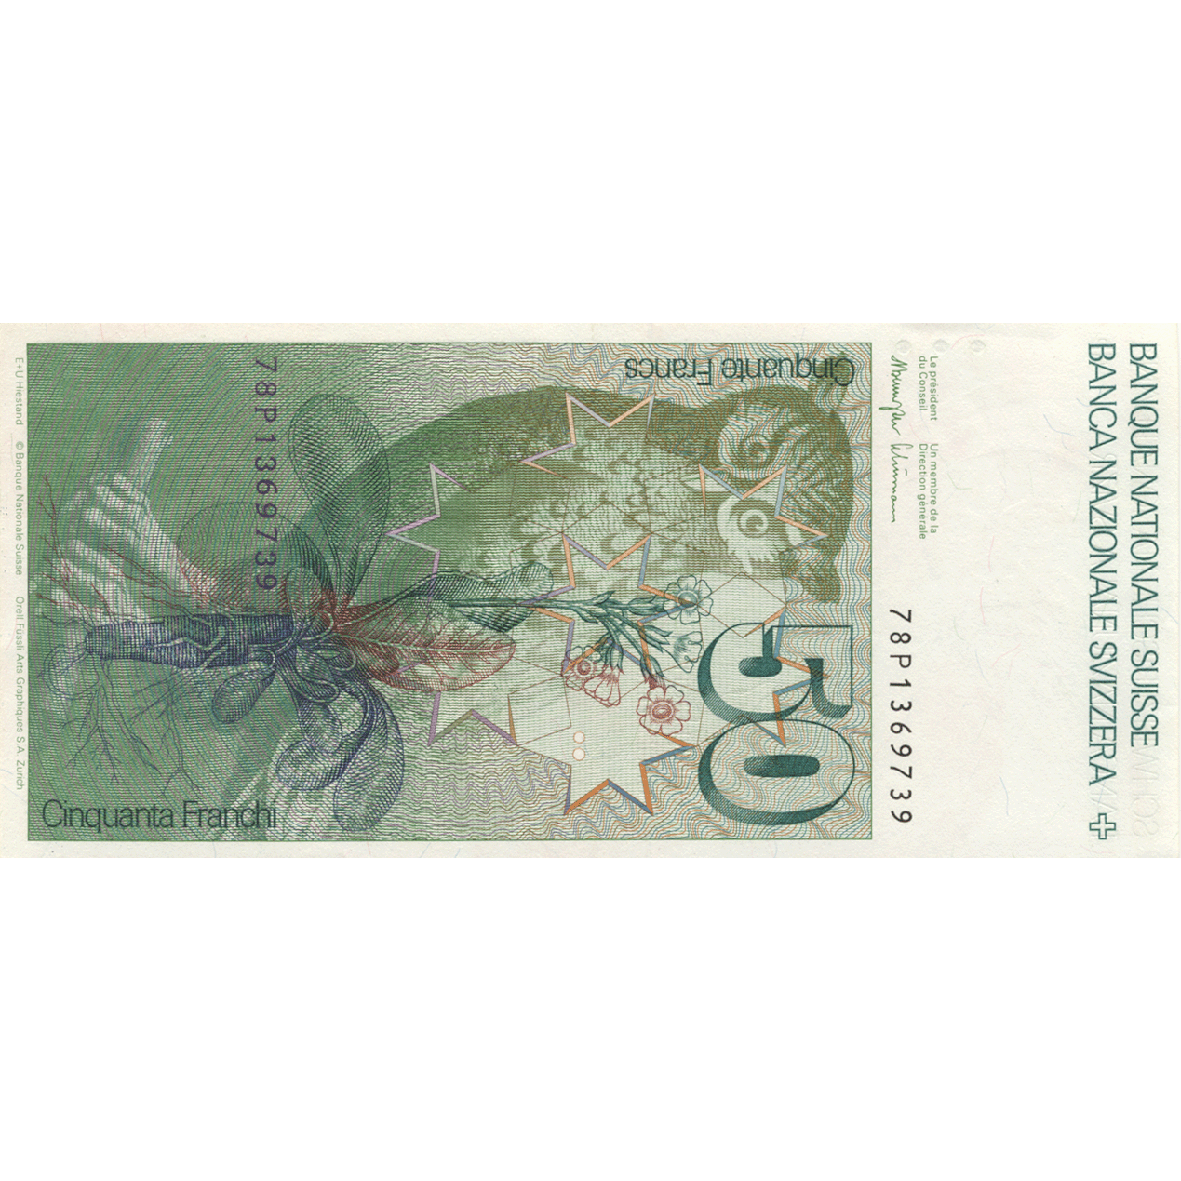 Swiss Confederation, 50 Francs (6th Banknote Series, in Circulation 1976-2000) (reverse)